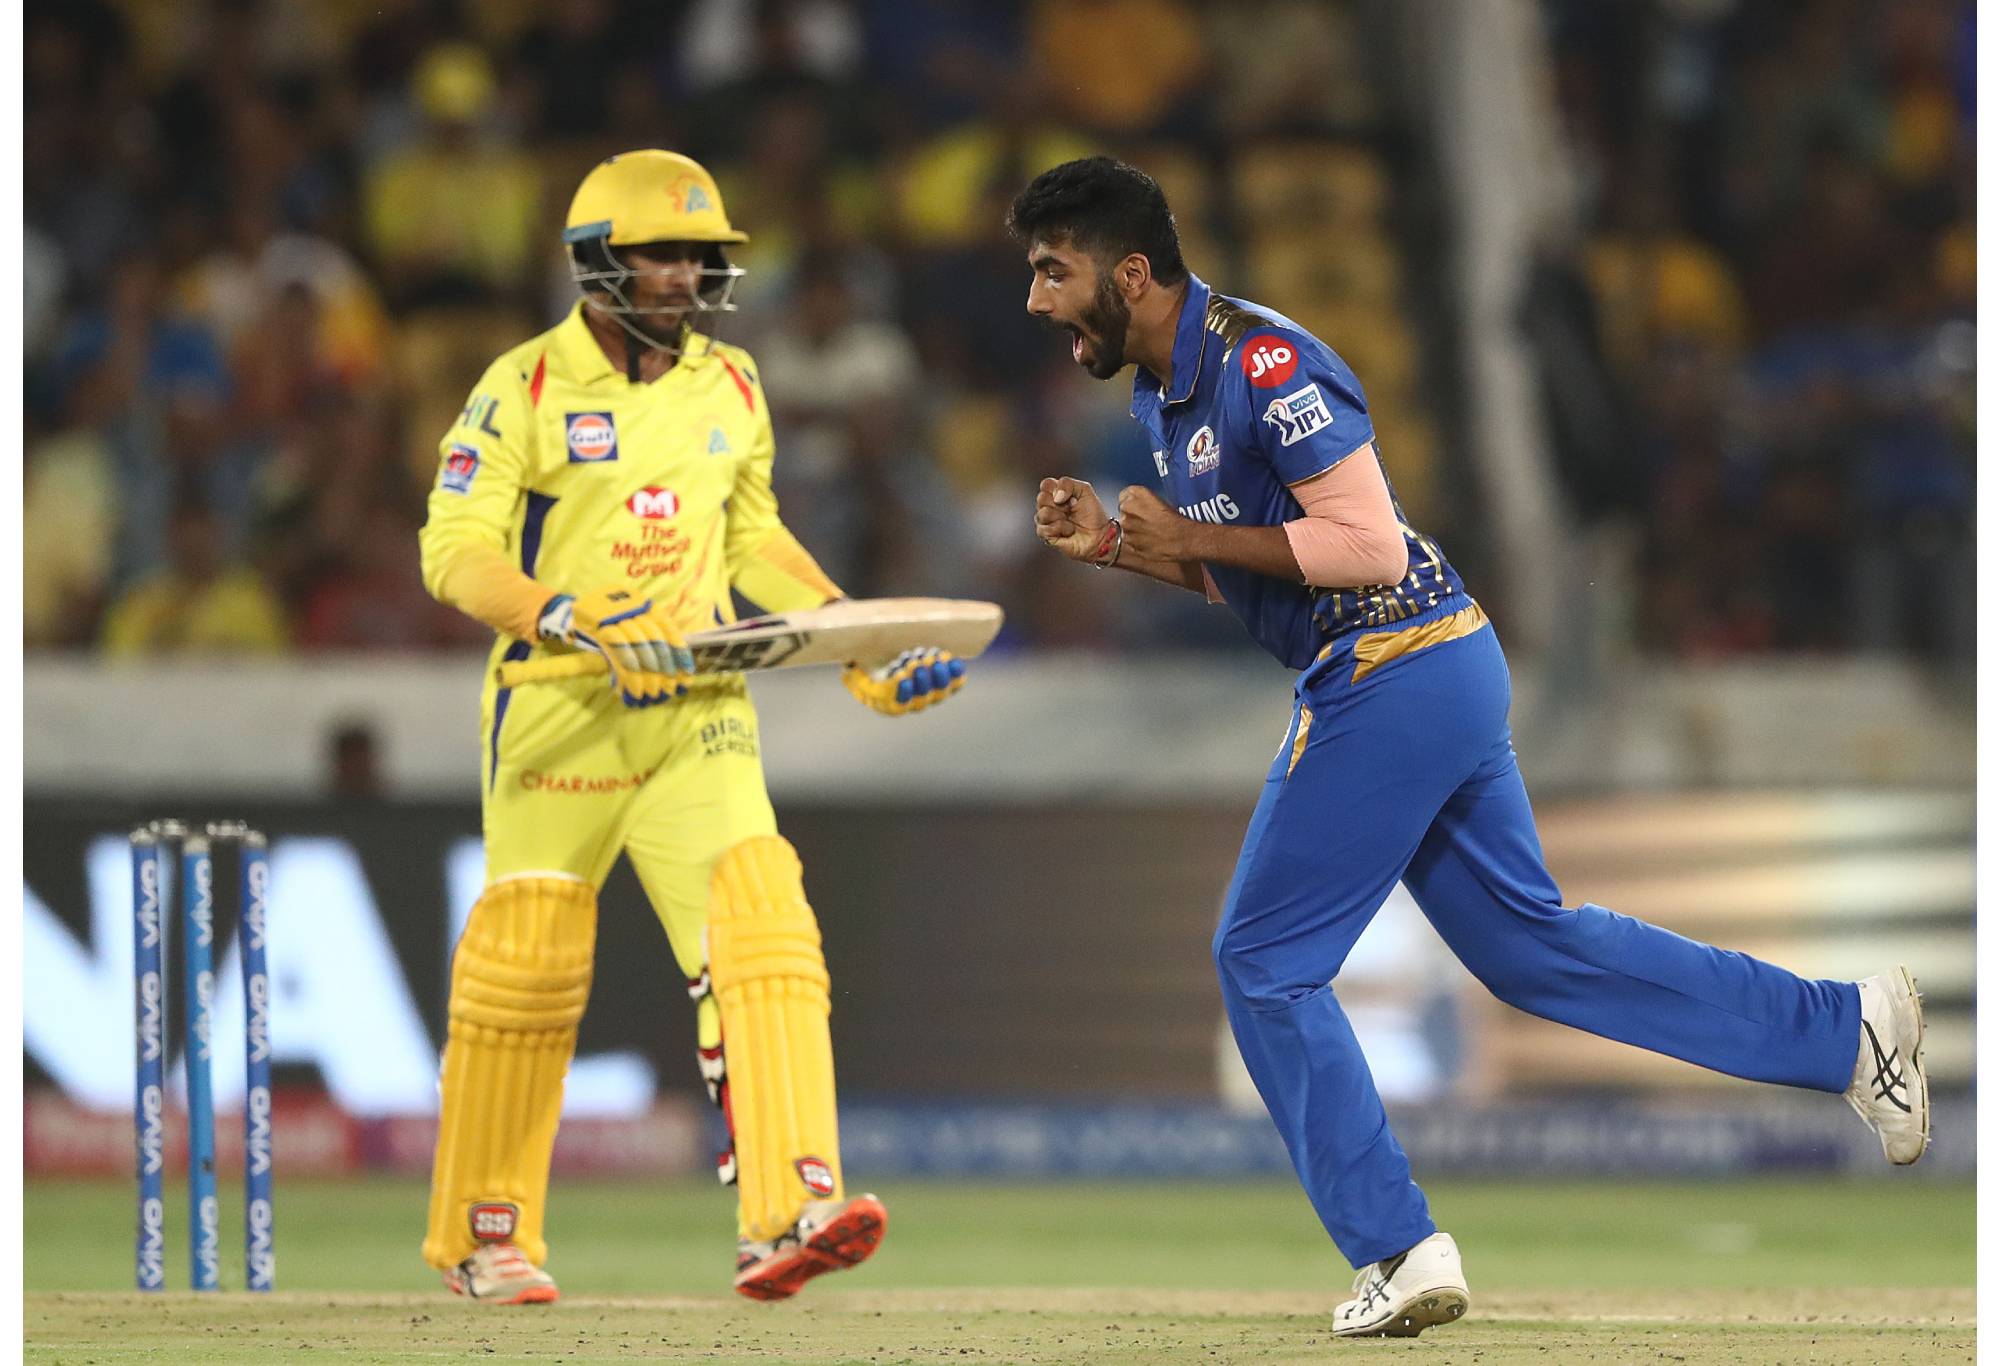 HYDERABAD, INDIA - MAY 12: Jasprit Bumrah of the Mumbai Indians celebrates taking the wicket of Ambati Rayudu of the Chennai Super Kings during the Indian Premier League Final match between the the Mumbai Indians and Chennai Super Kings at Rajiv Gandhi International Cricket Stadium on May 12, 2019 in Hyderabad, India. (Photo by Robert Cianflone/Getty Images)